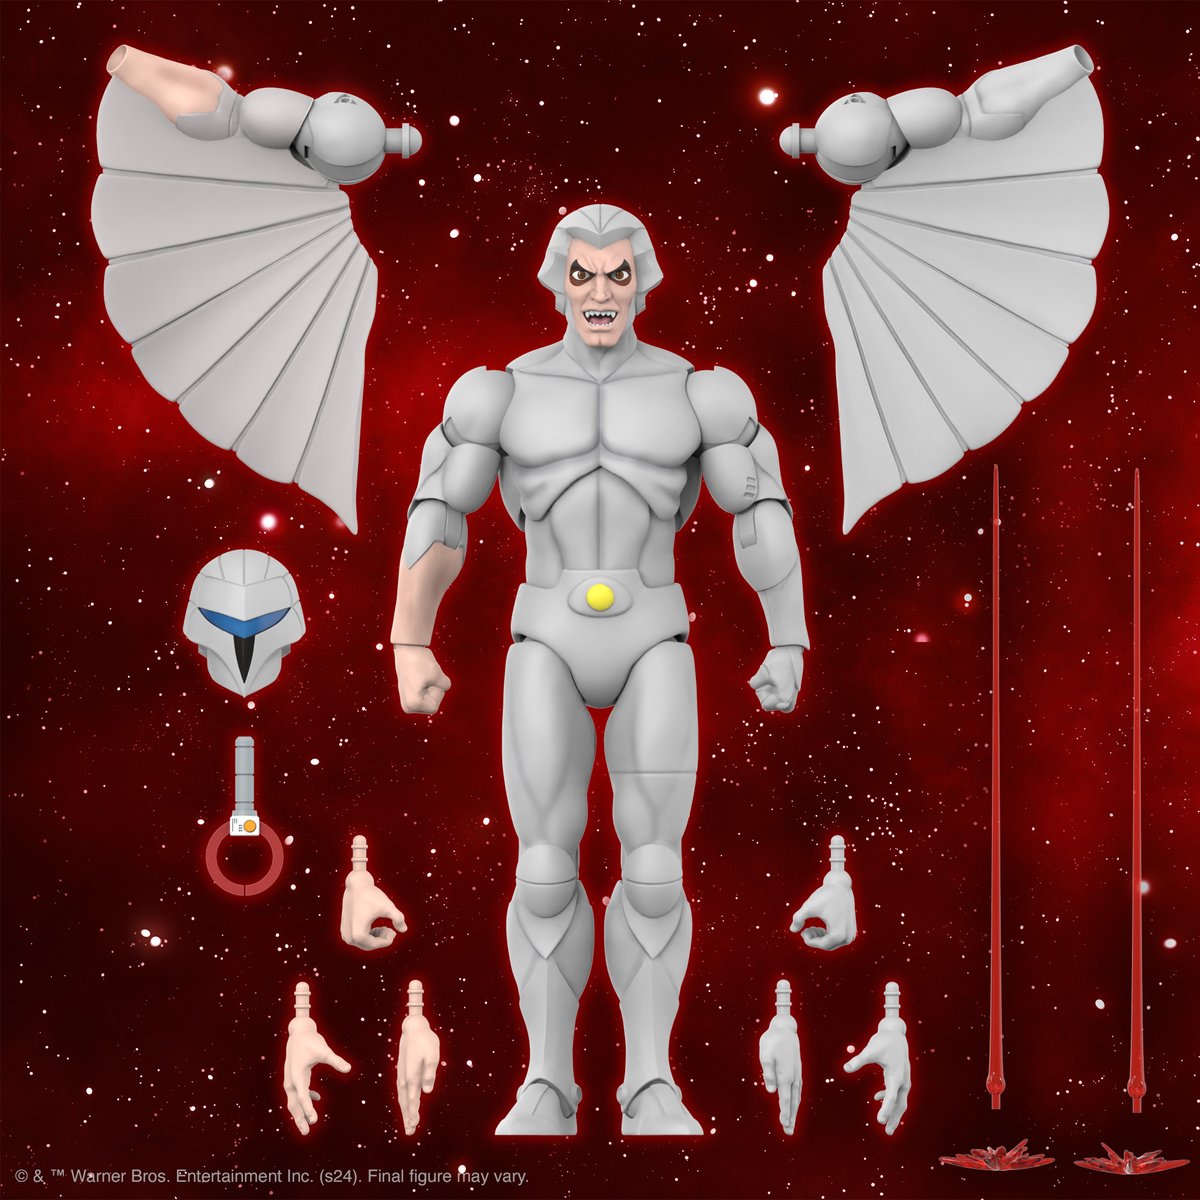 There’s a new bandit in the Limbo Galaxy that bears an uncanny resemblance to the leader of the SilverHawks! This 7” scale SilverHawks ULTIMATES! Dark Bird™ figure may resemble Quicksilver™. Available exclusively @BigBadToyStore! #Super7